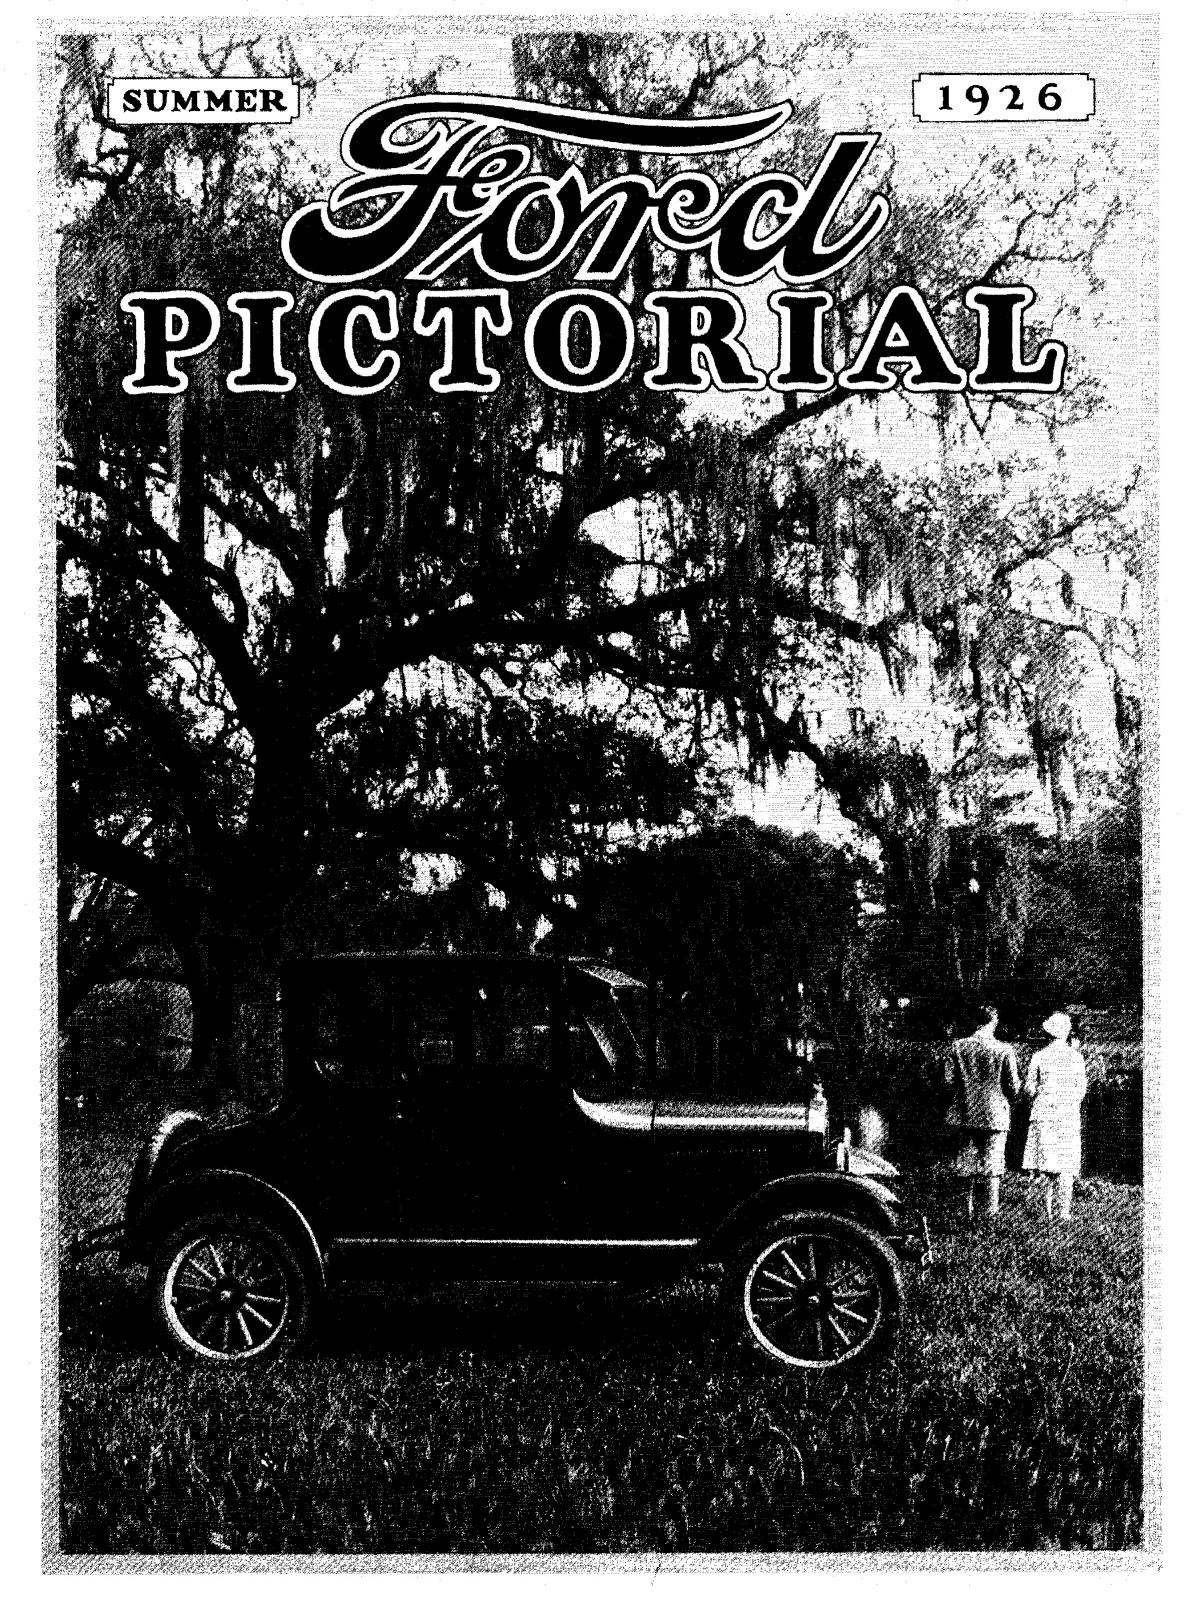 1926_Ford_Pictorial-03-1